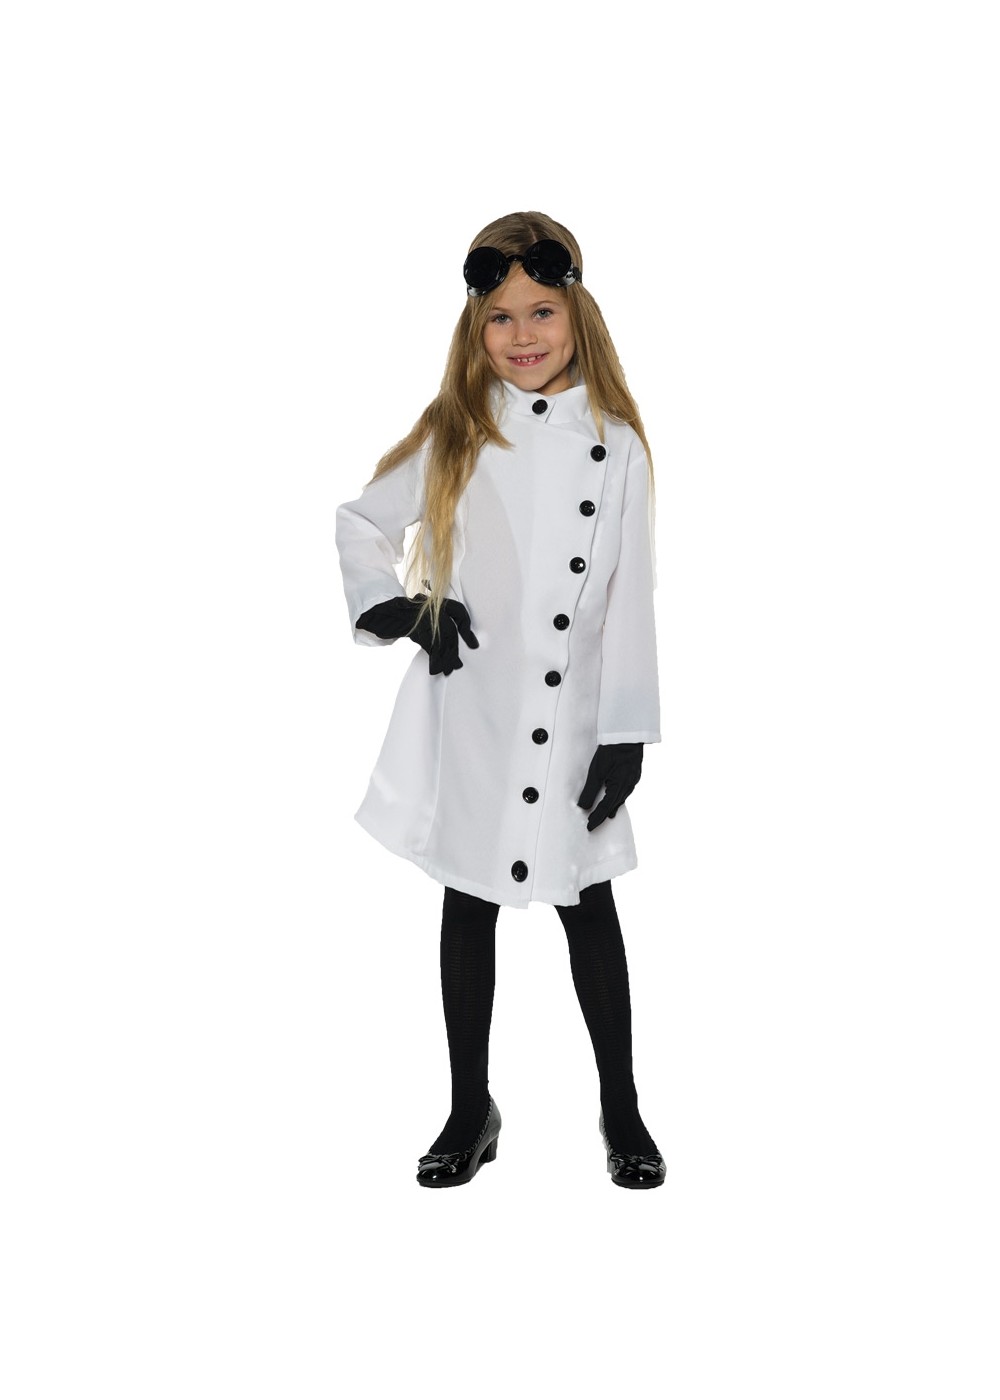 Mad Science Girl Costume